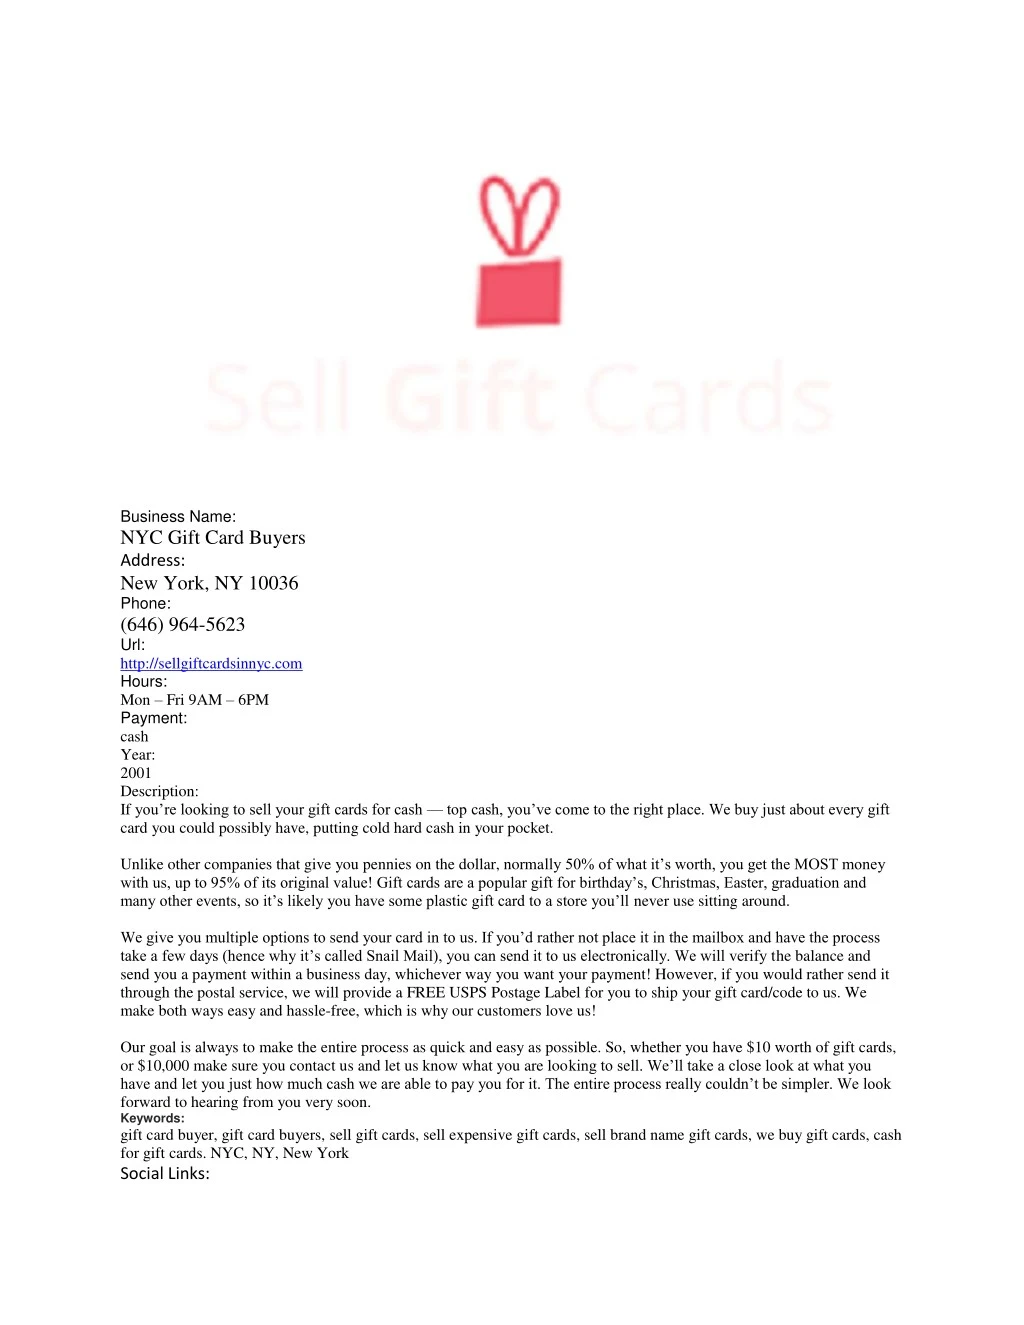 business name nyc gift card buyers address